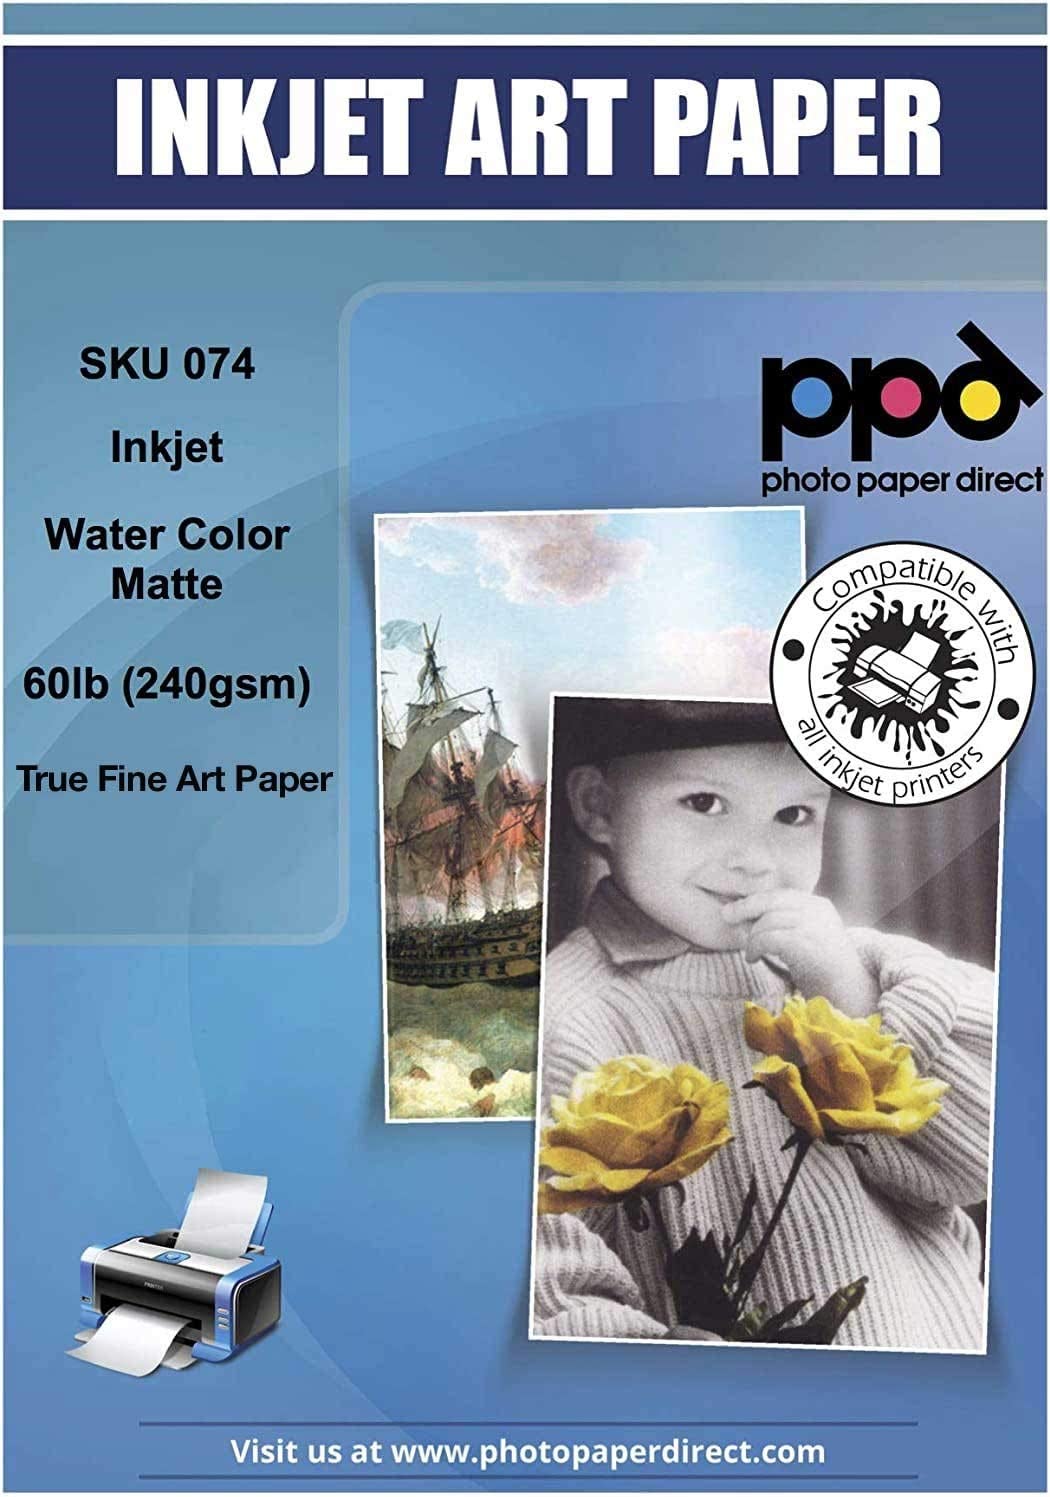 PPD Inkjet Watercolor Matte Giclee Paper 64lb (240gsm) 8.5 x 11